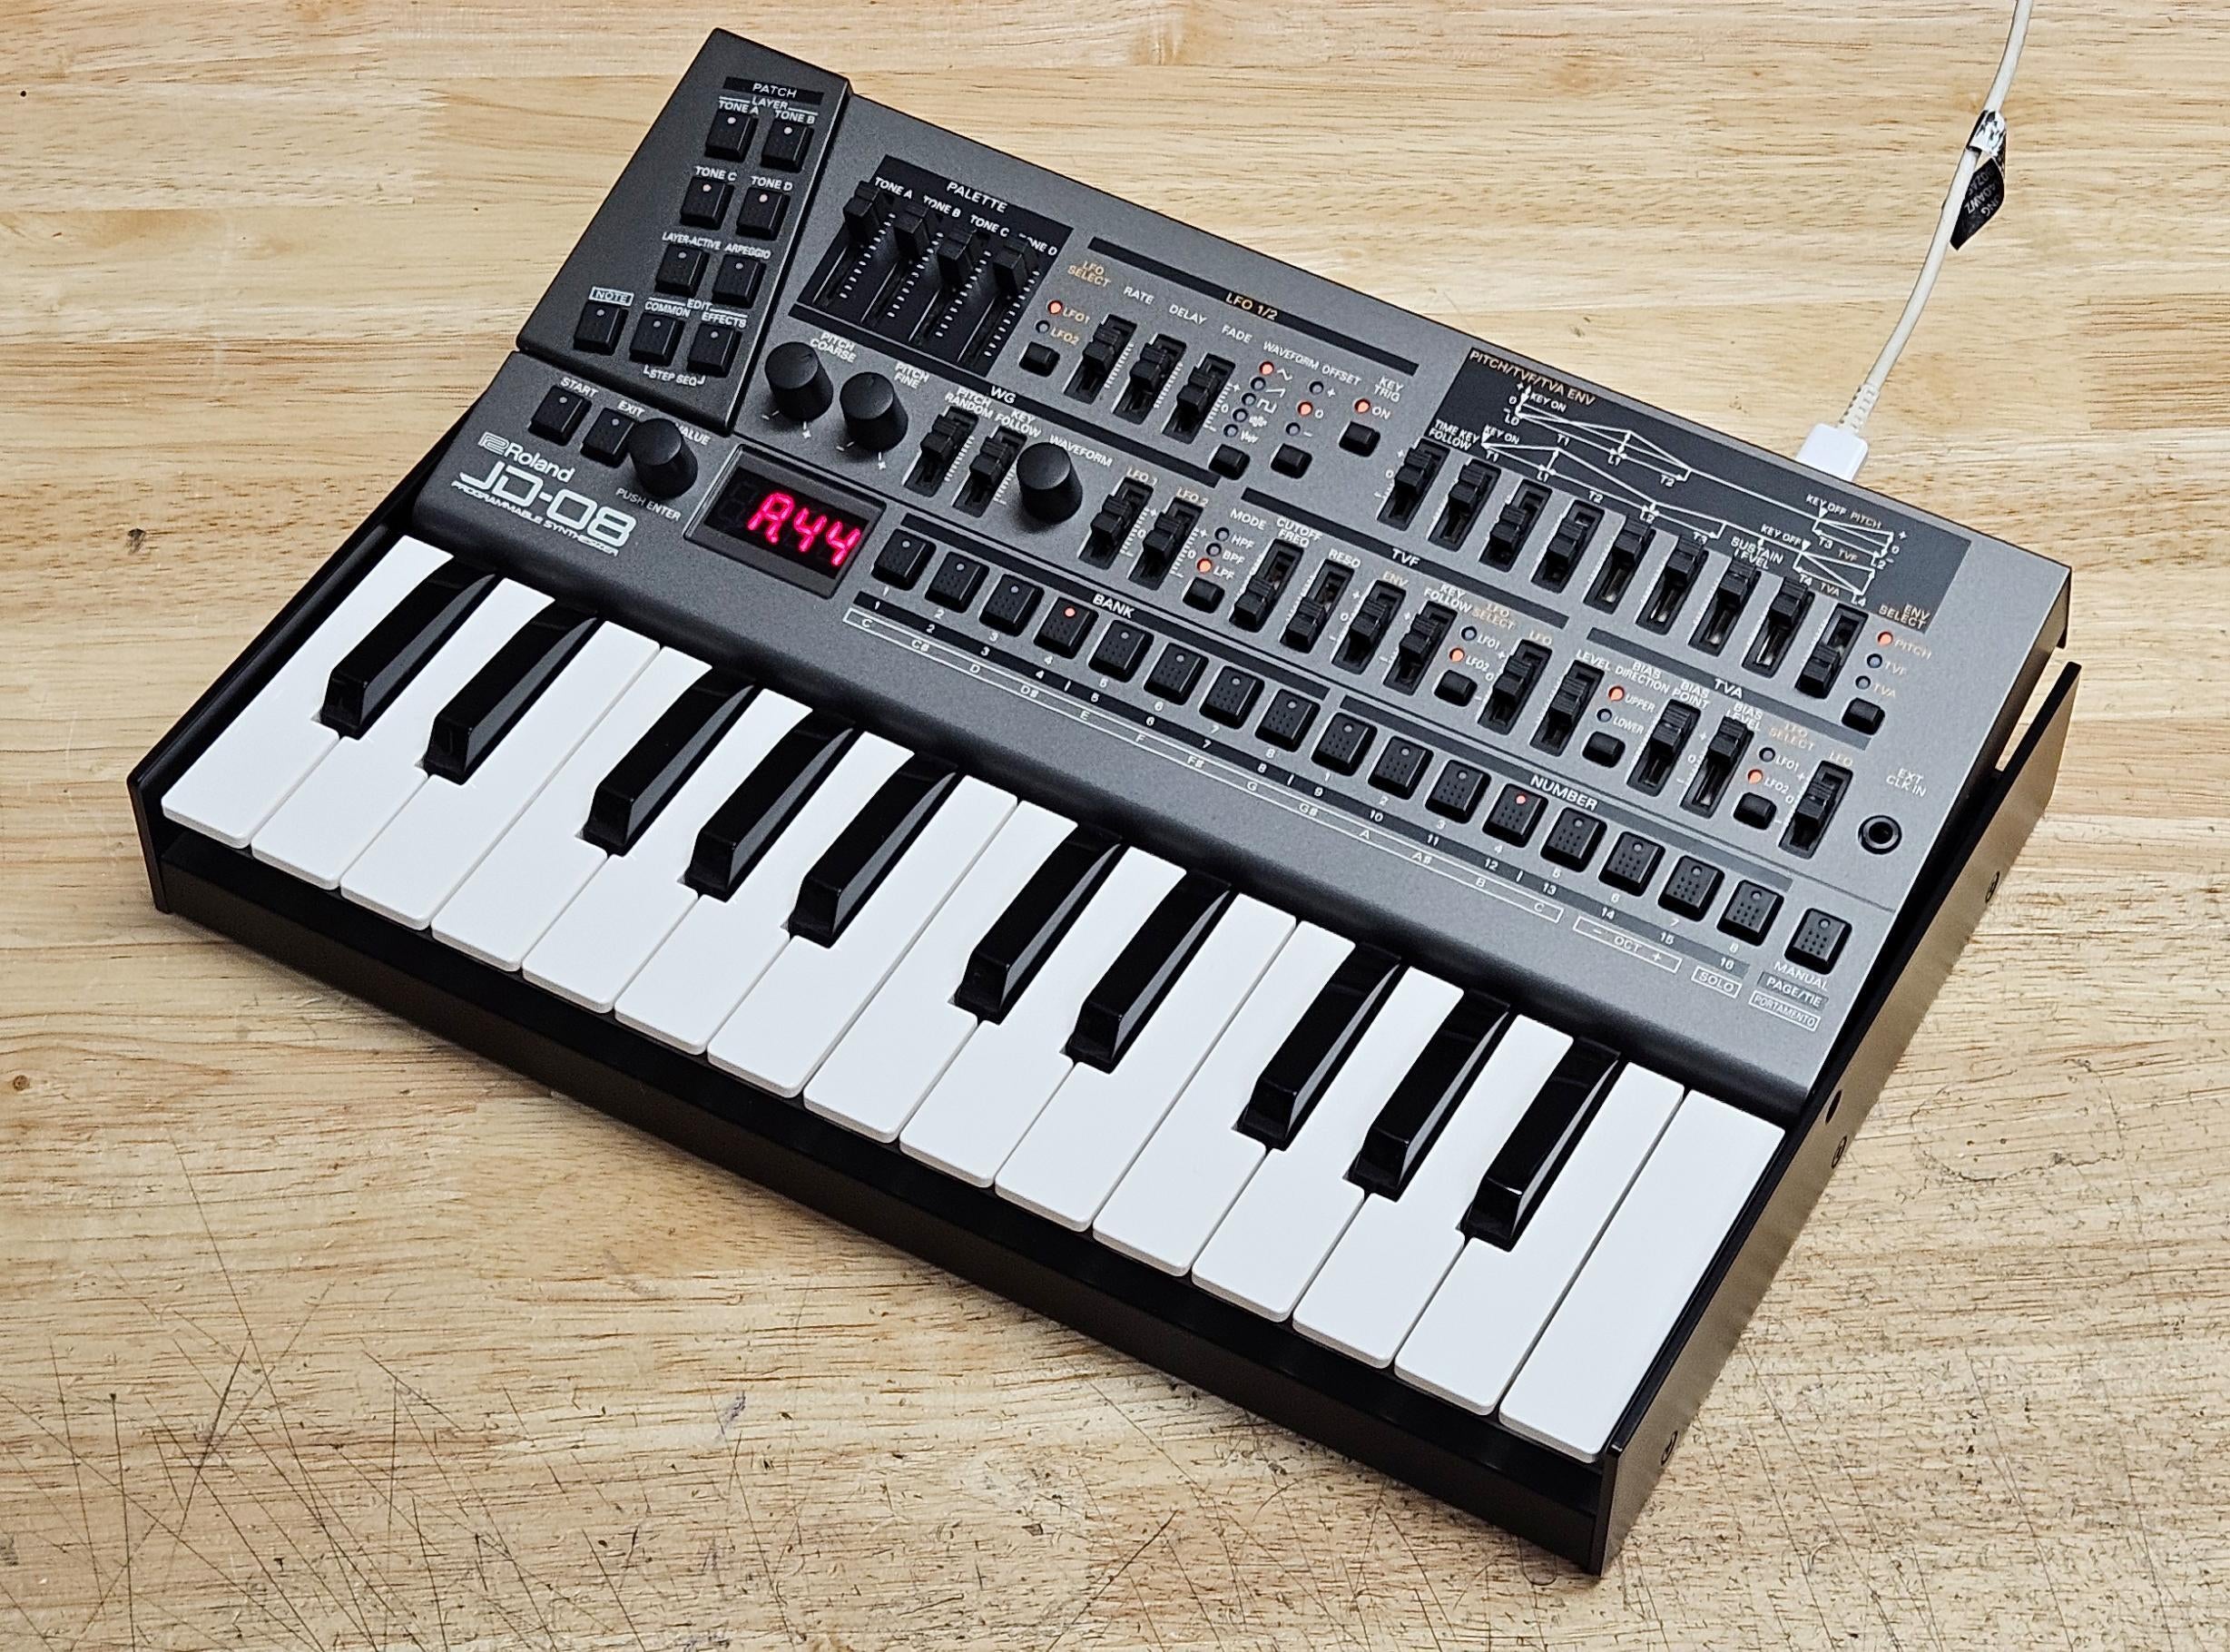 Used Roland JD-08 Boutique Series - Sweetwater's Gear Exchange